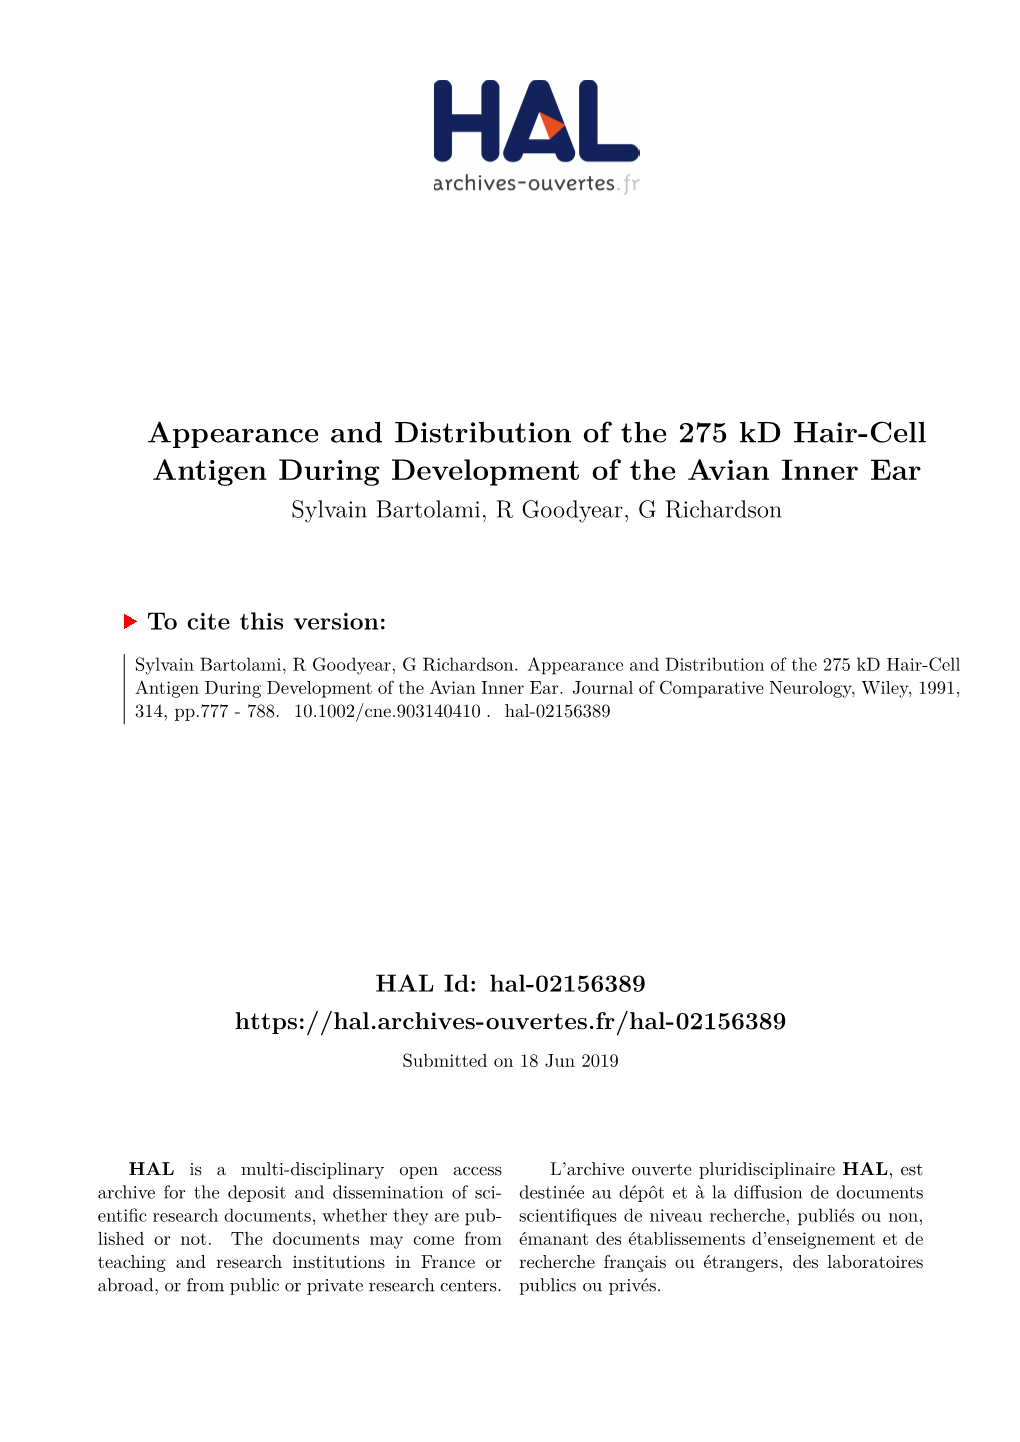 Appearance and Distribution of the 275 Kd Hair-Cell Antigen During Development of the Avian Inner Ear Sylvain Bartolami, R Goodyear, G Richardson